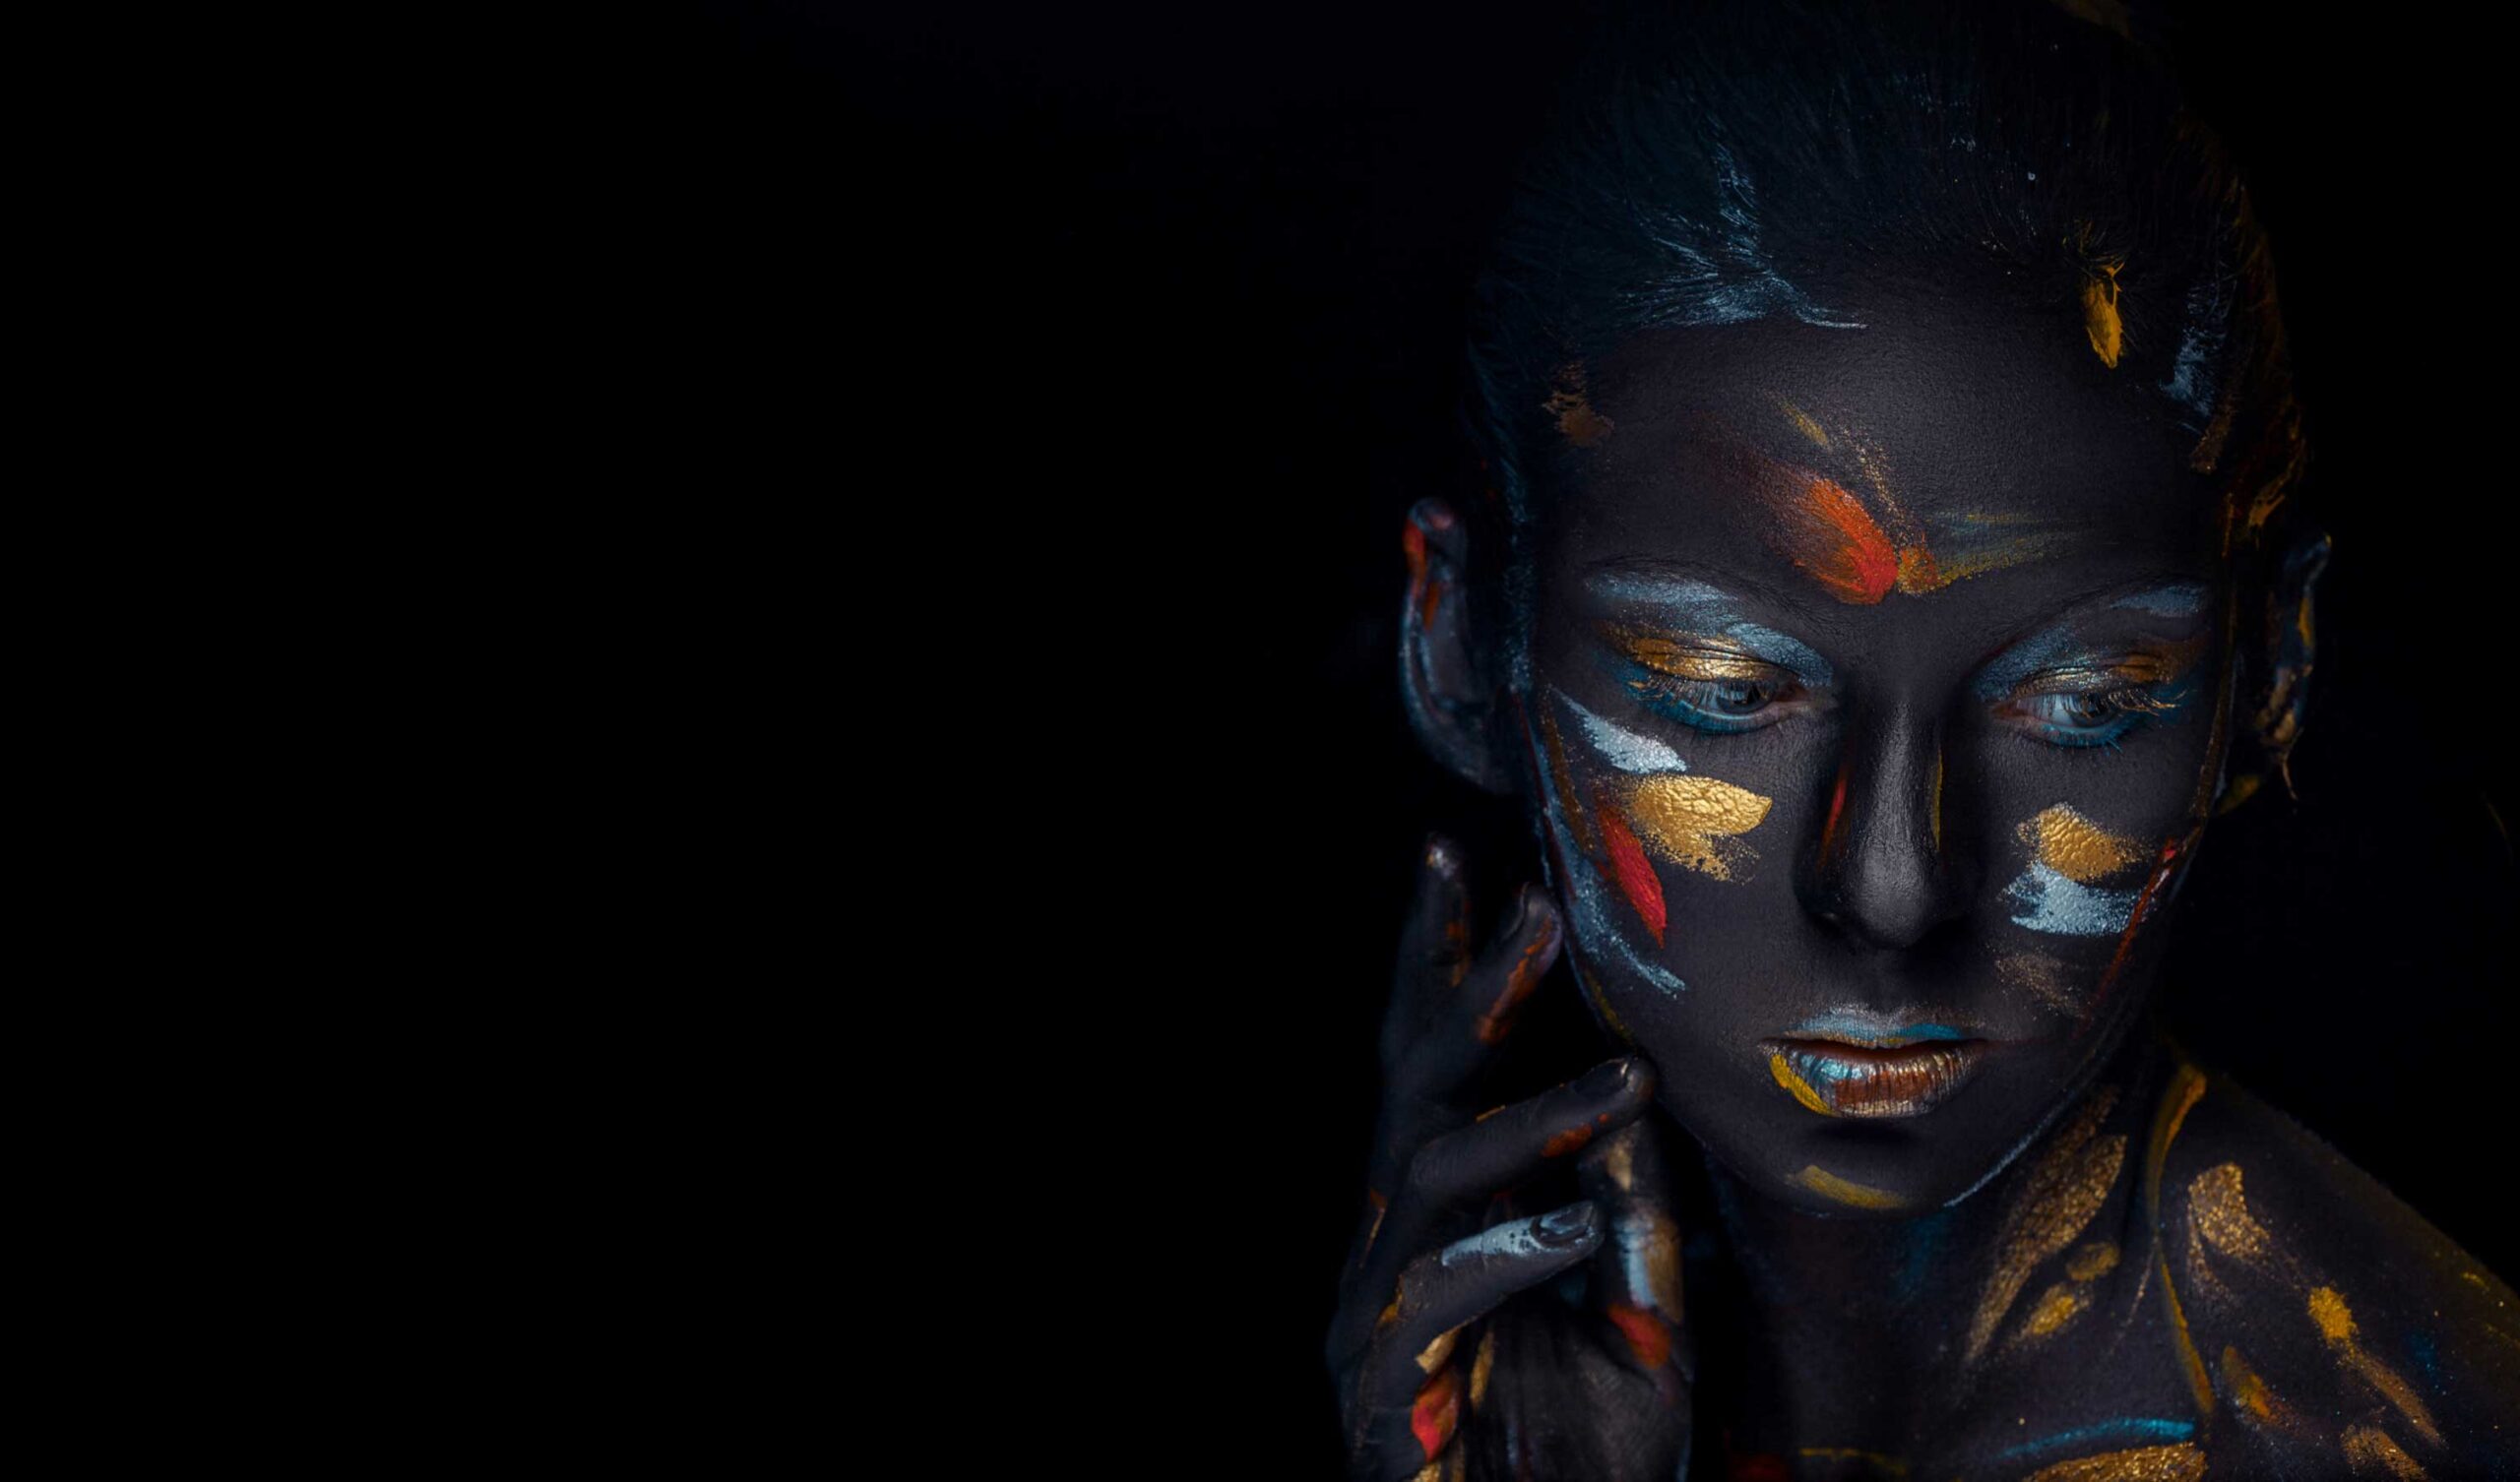 A person with dark, artistic body paint highlighted with vibrant orange and gold patterns, posing thoughtfully against a black background.